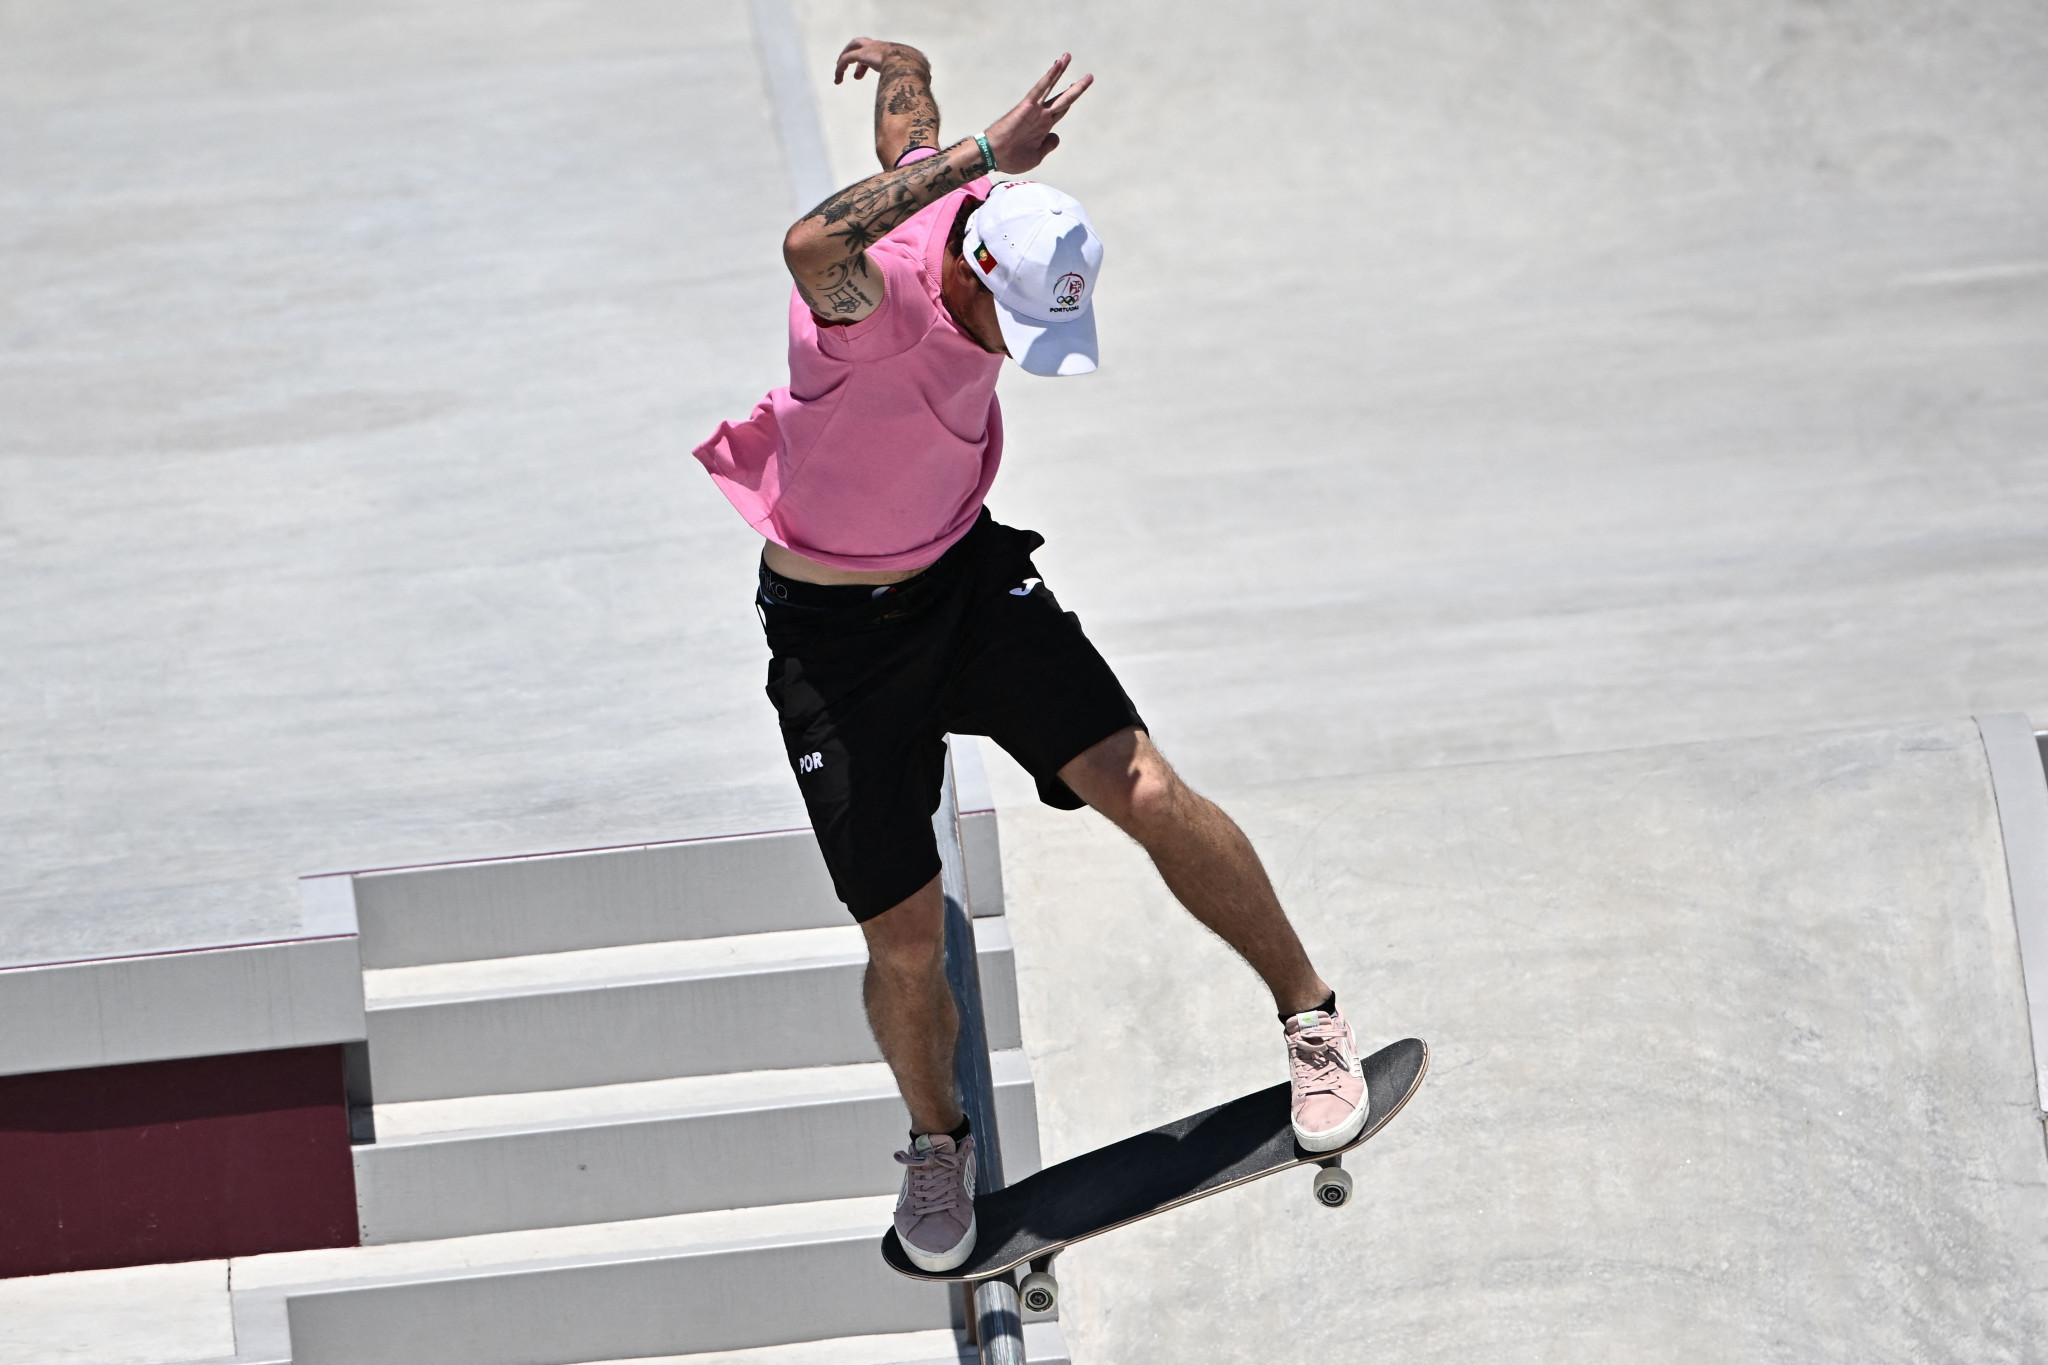 Gustavo Ribeiro won the first stop of the Street League Skateboarding Championships Tour in Salt Lake City ©Getty Images